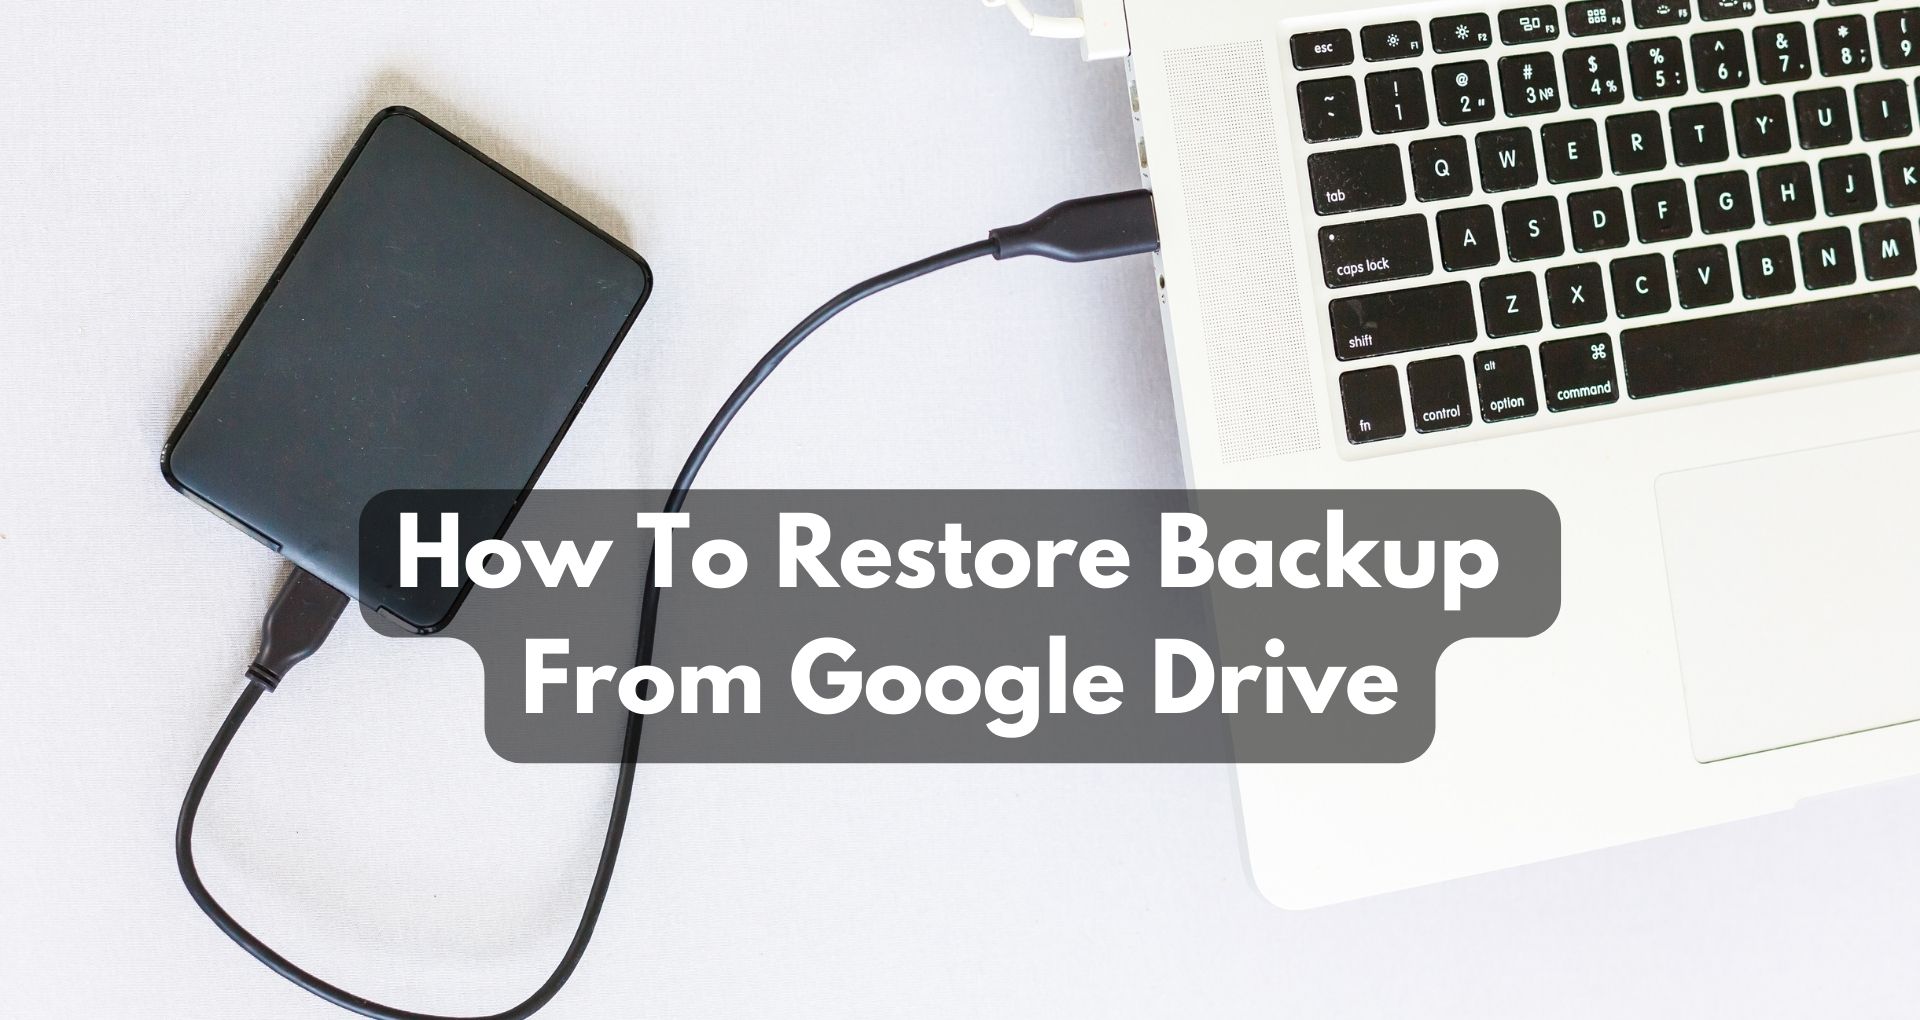 How To Restore Backup From Google Drive?